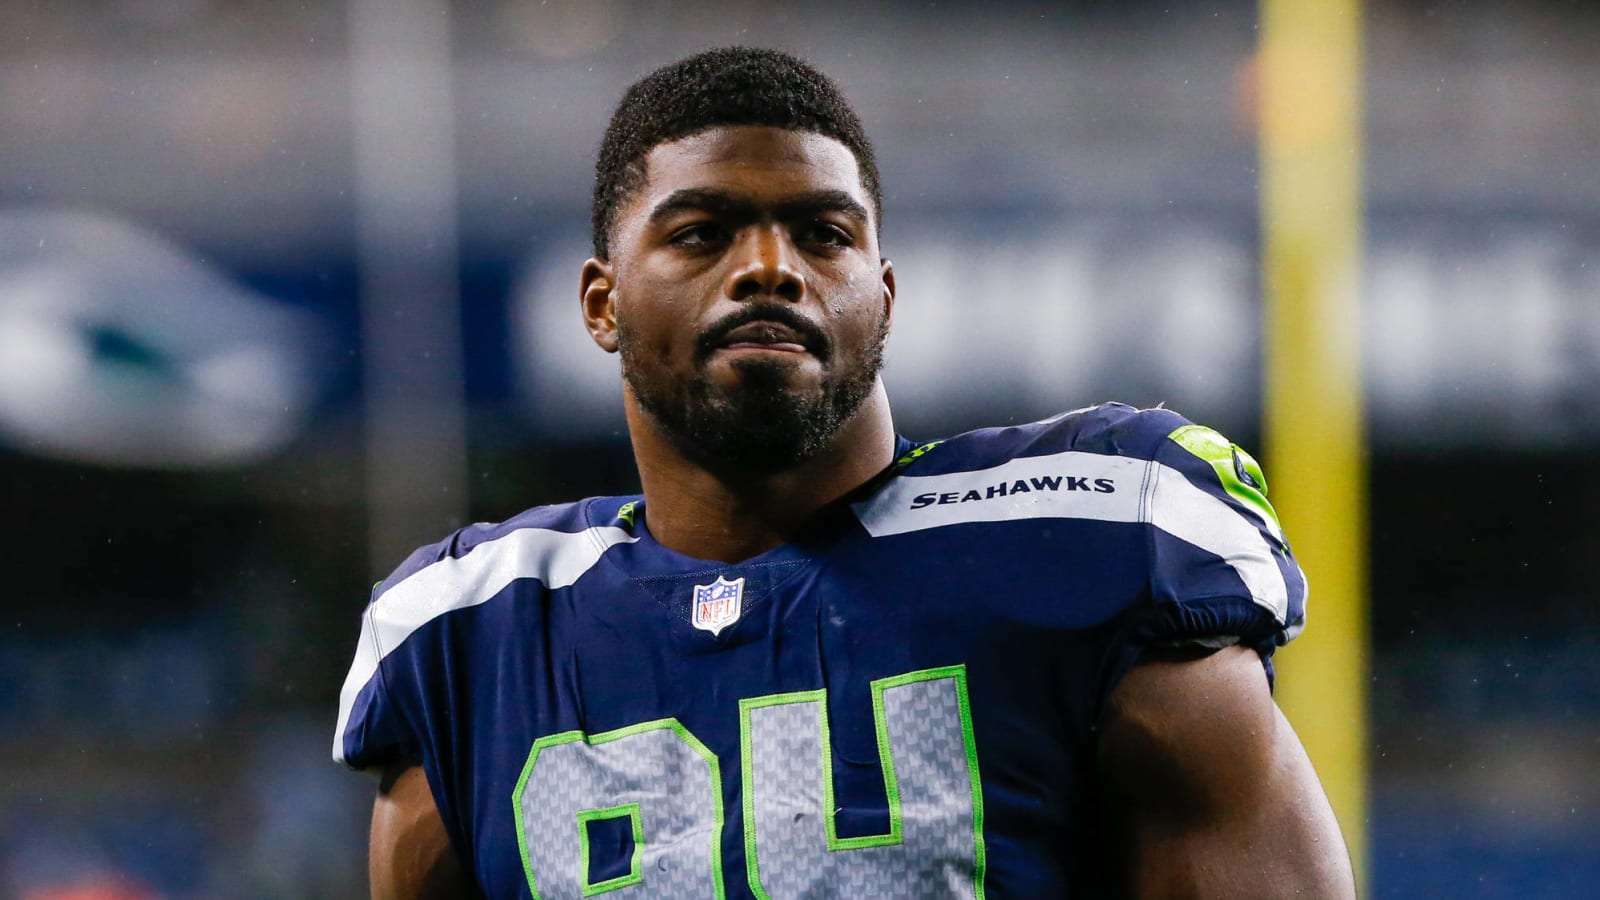 Watch: Seahawks DT Rasheem Green blocks, returns extra point for two points